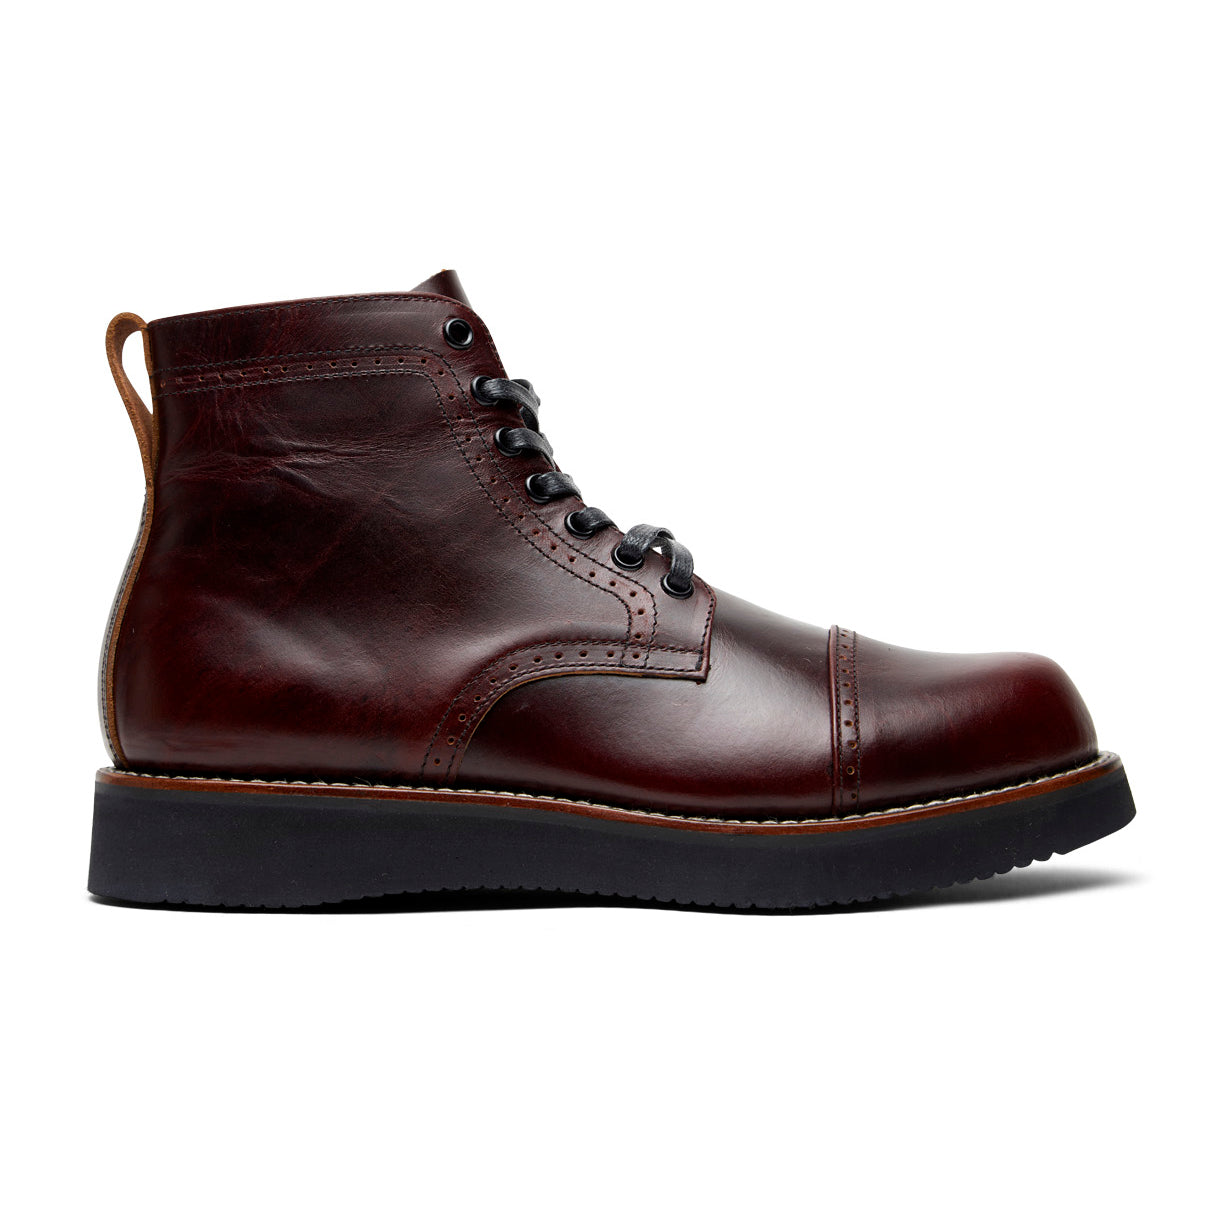 The Aaron men's burgundy leather boot from the Broken Homme collection is shown on a white background, featuring a cap toe silhouette.